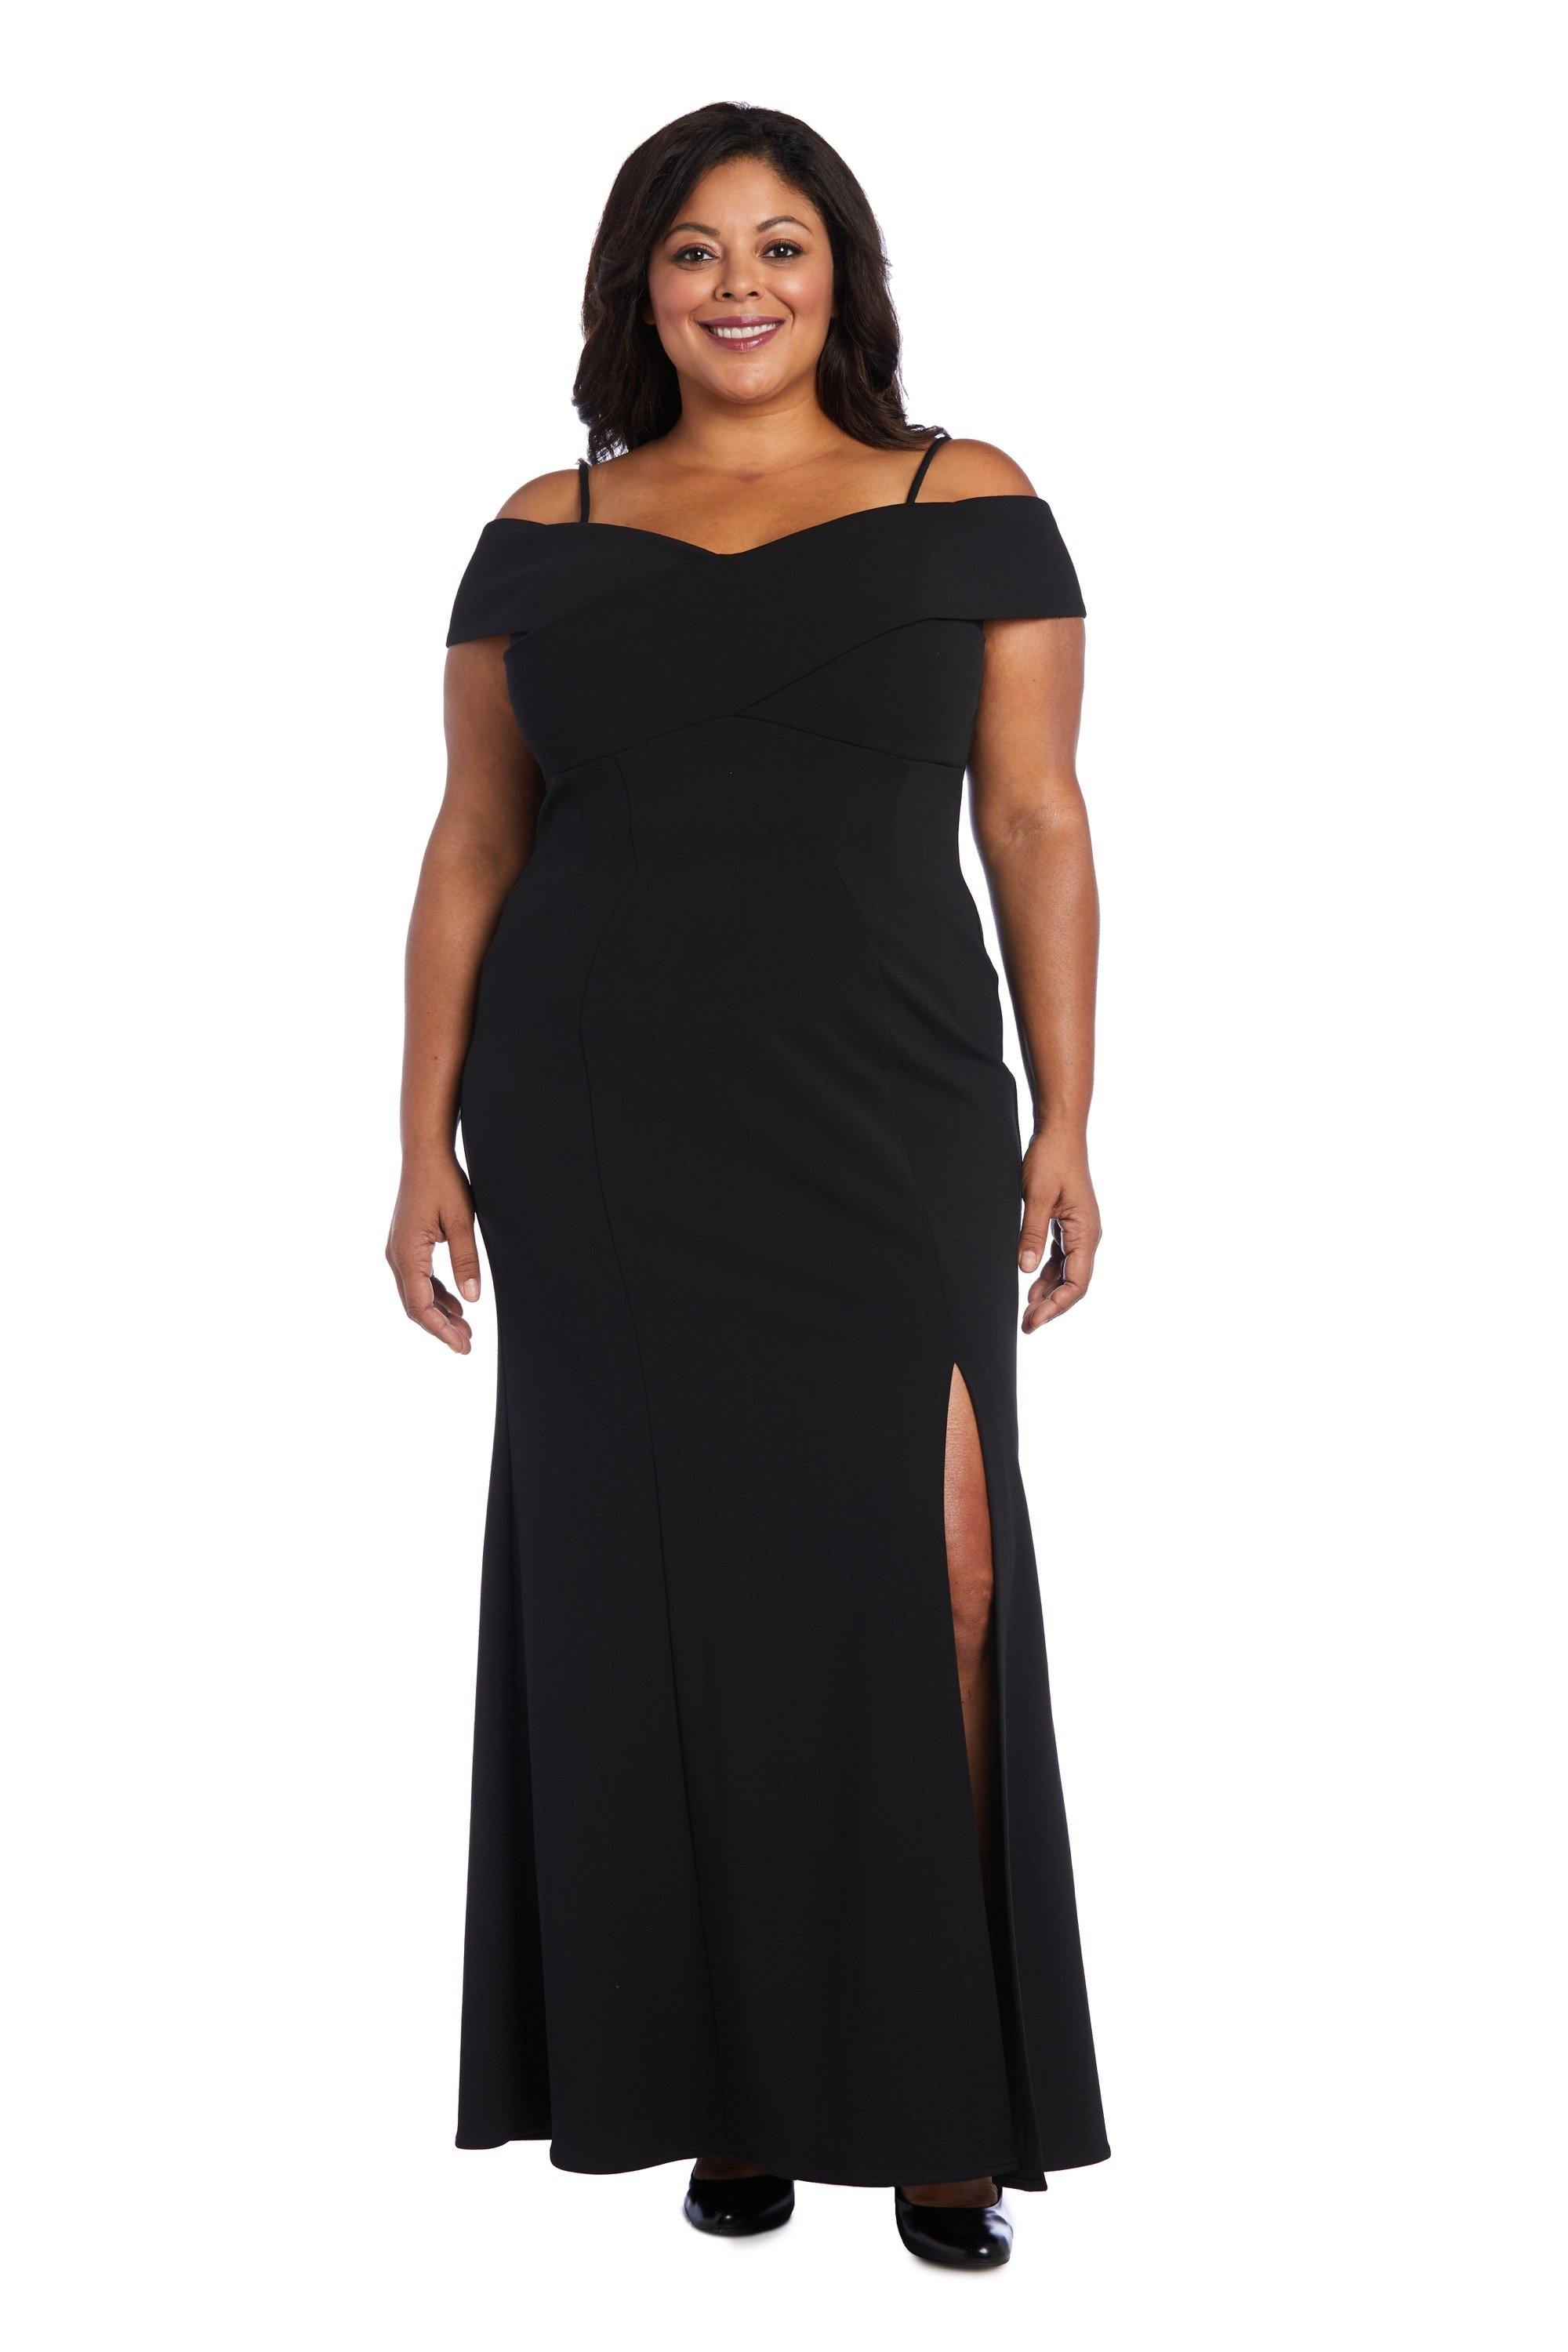 Nightway Plus Size Evening Long Dress 21825W - The Dress Outlet